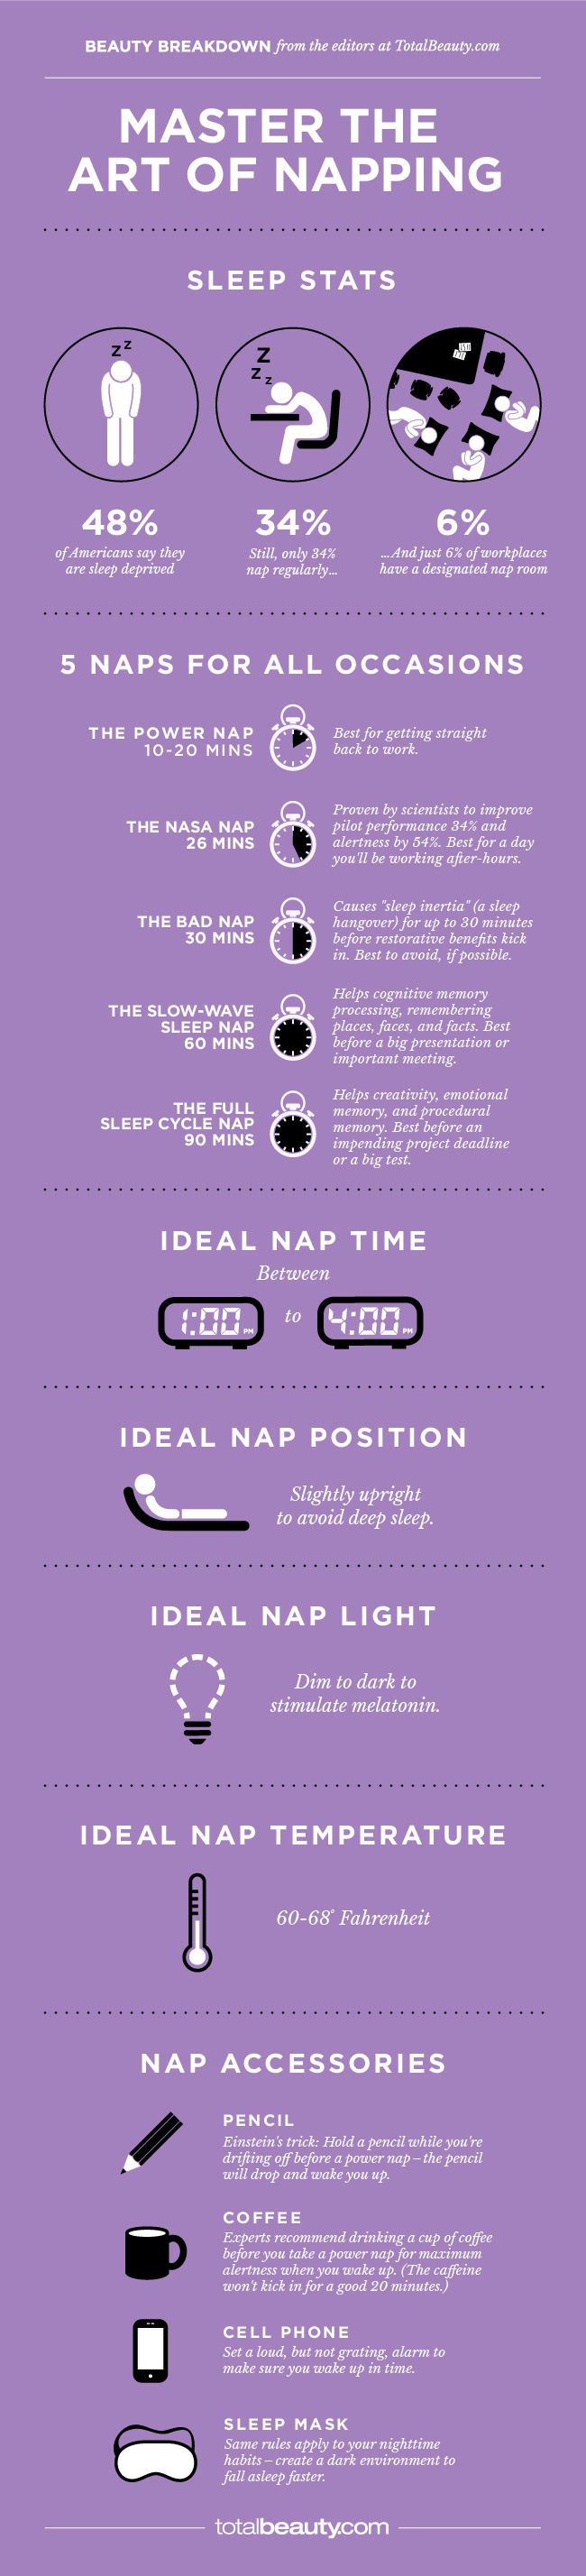 How to Become a Napping Expert